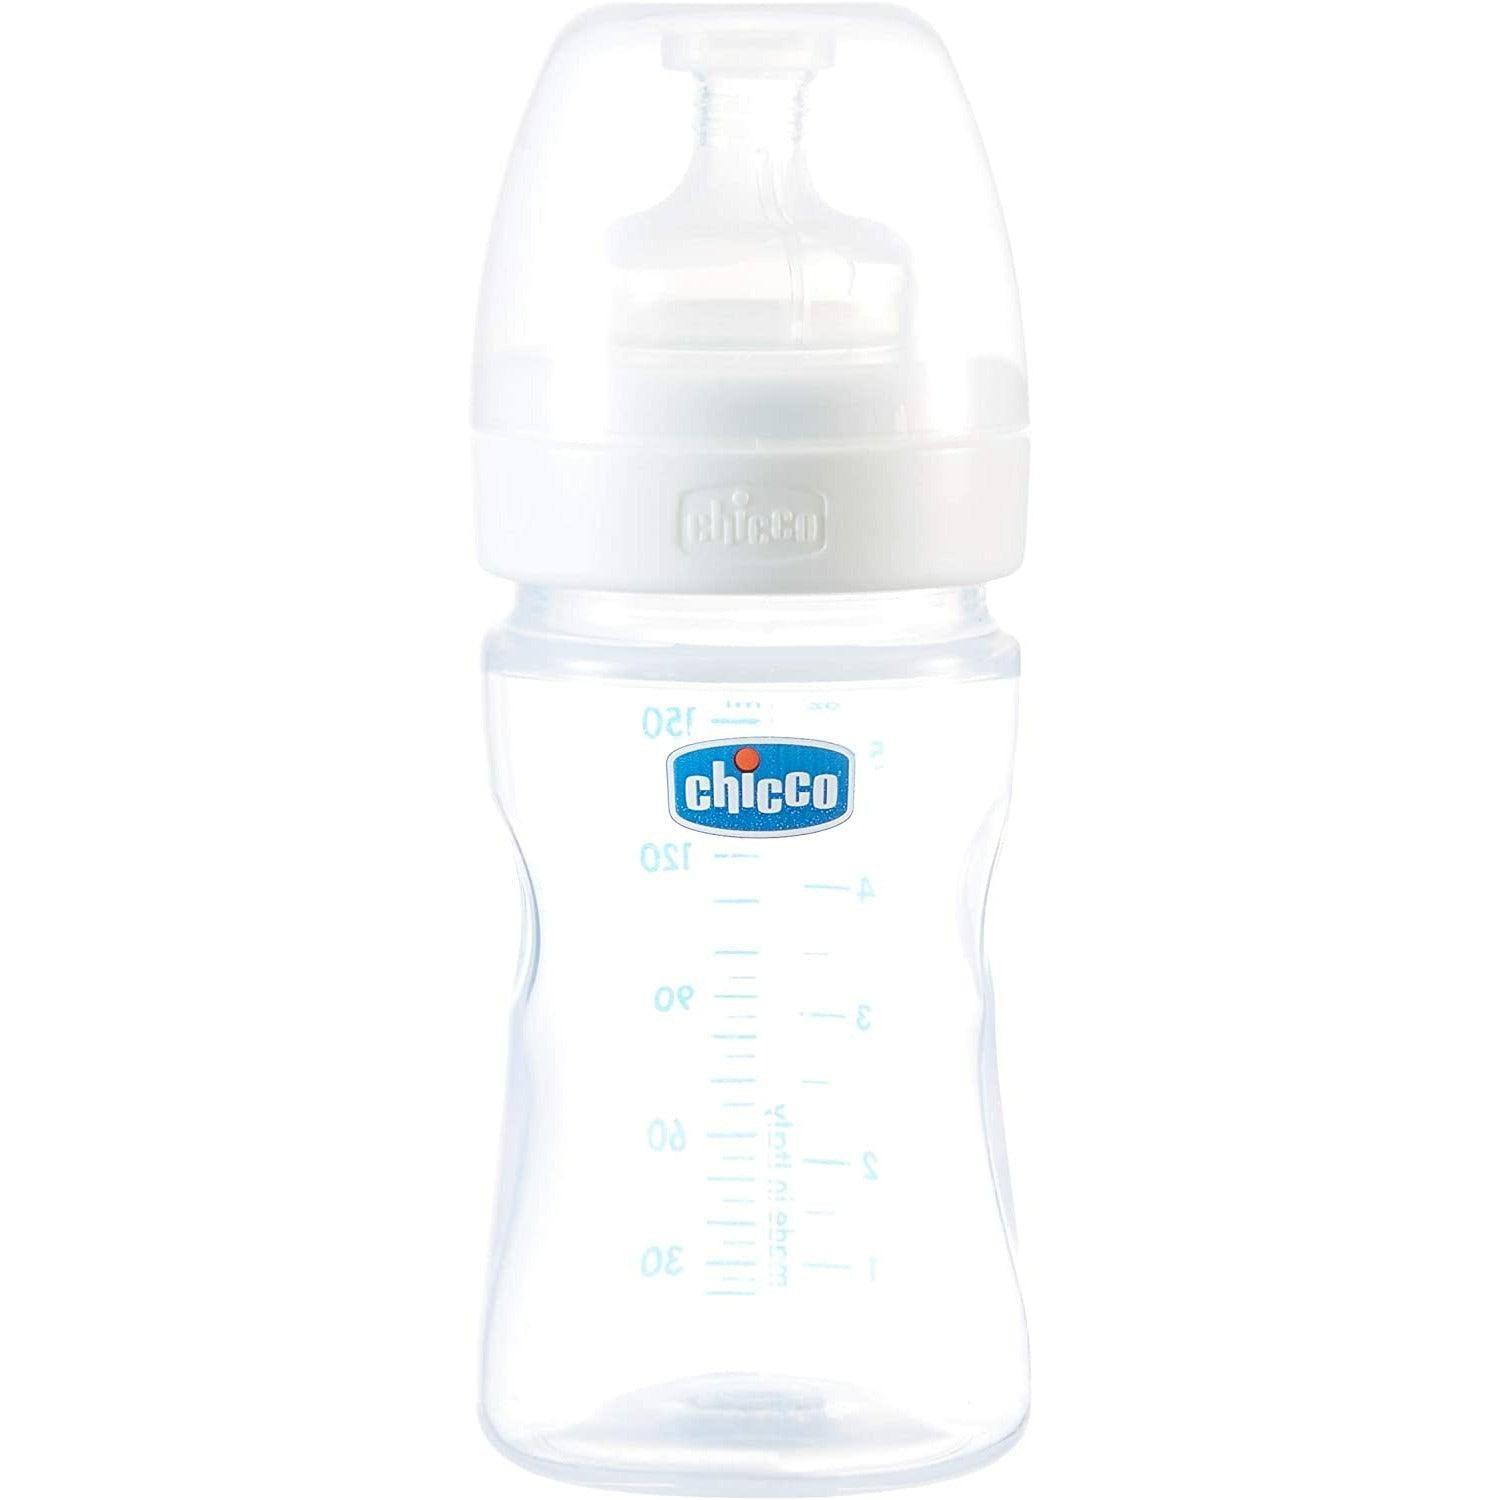 Chicco Classic Breast Pump - Ourkids - Chicco